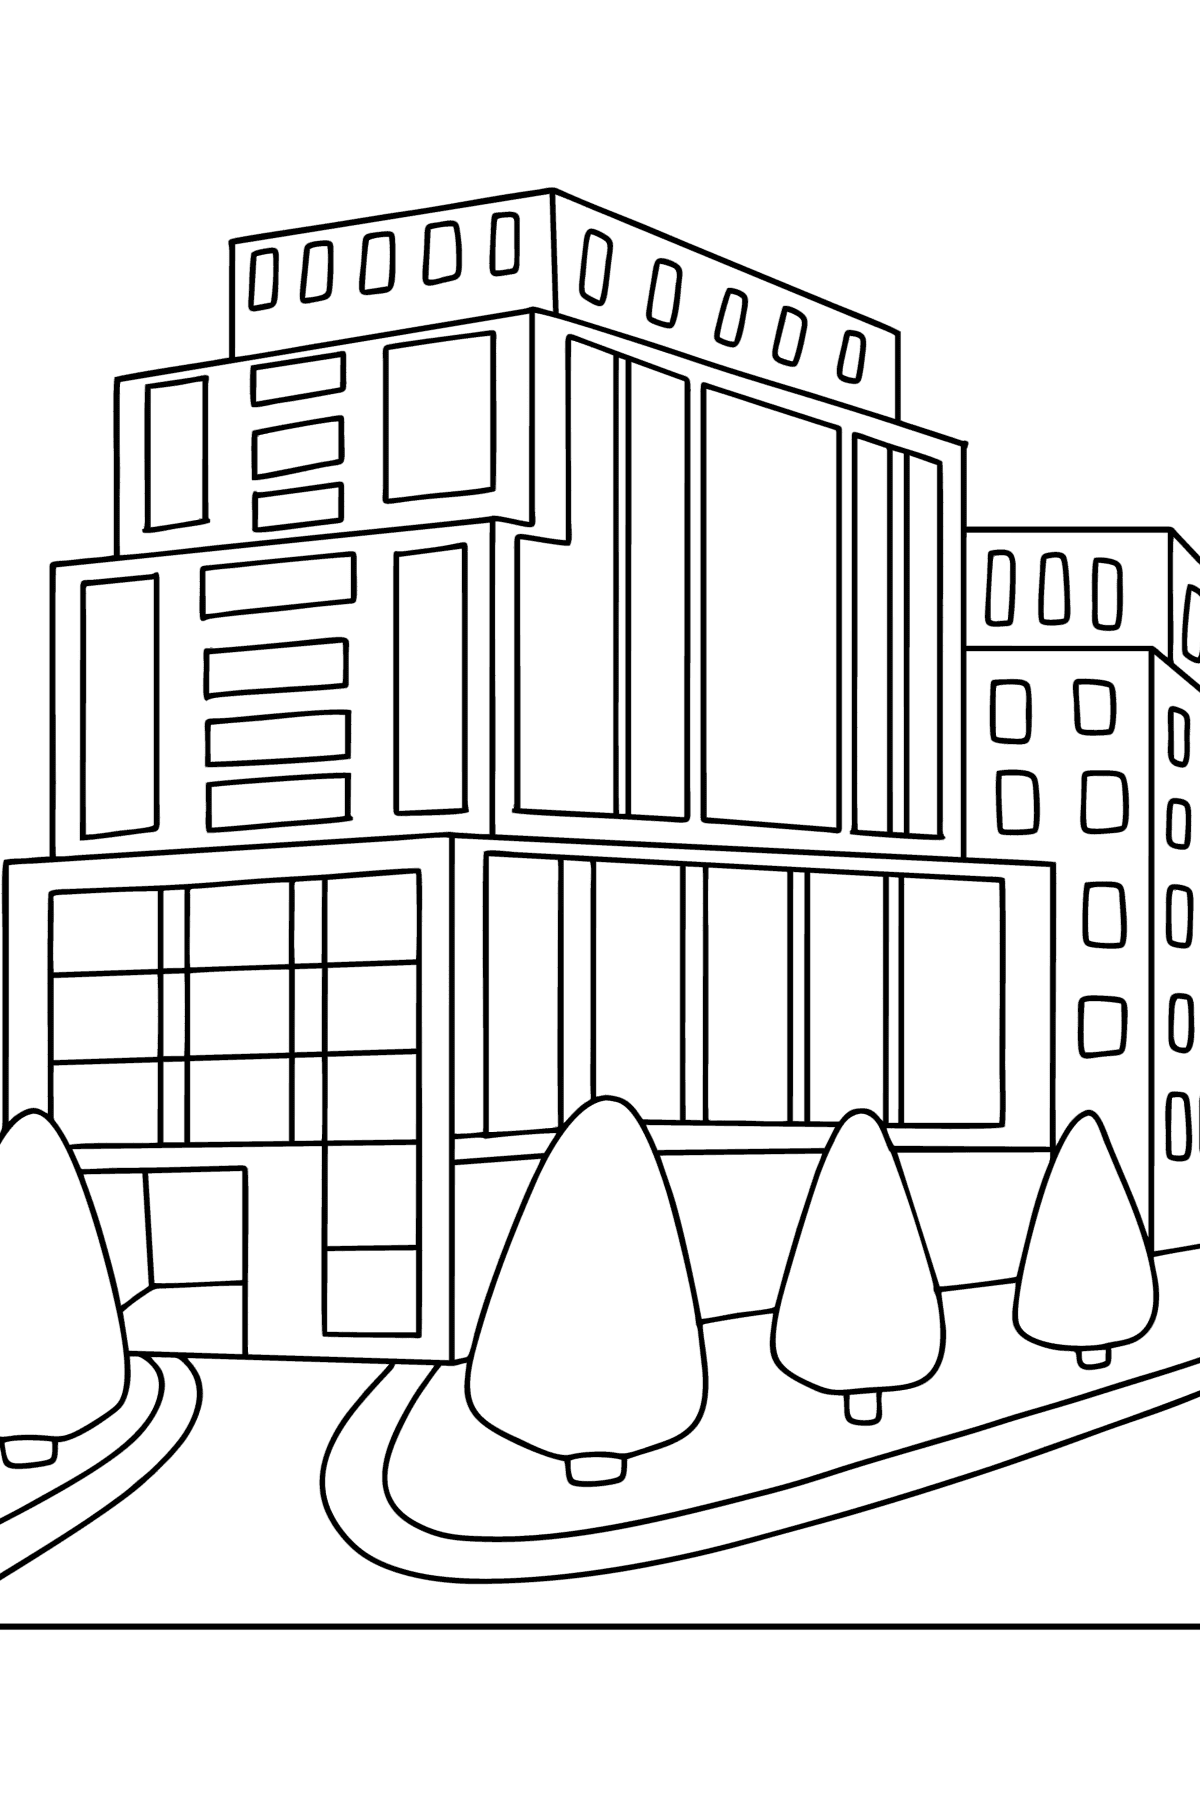 Modern Houses coloring page - Coloring Pages for Kids